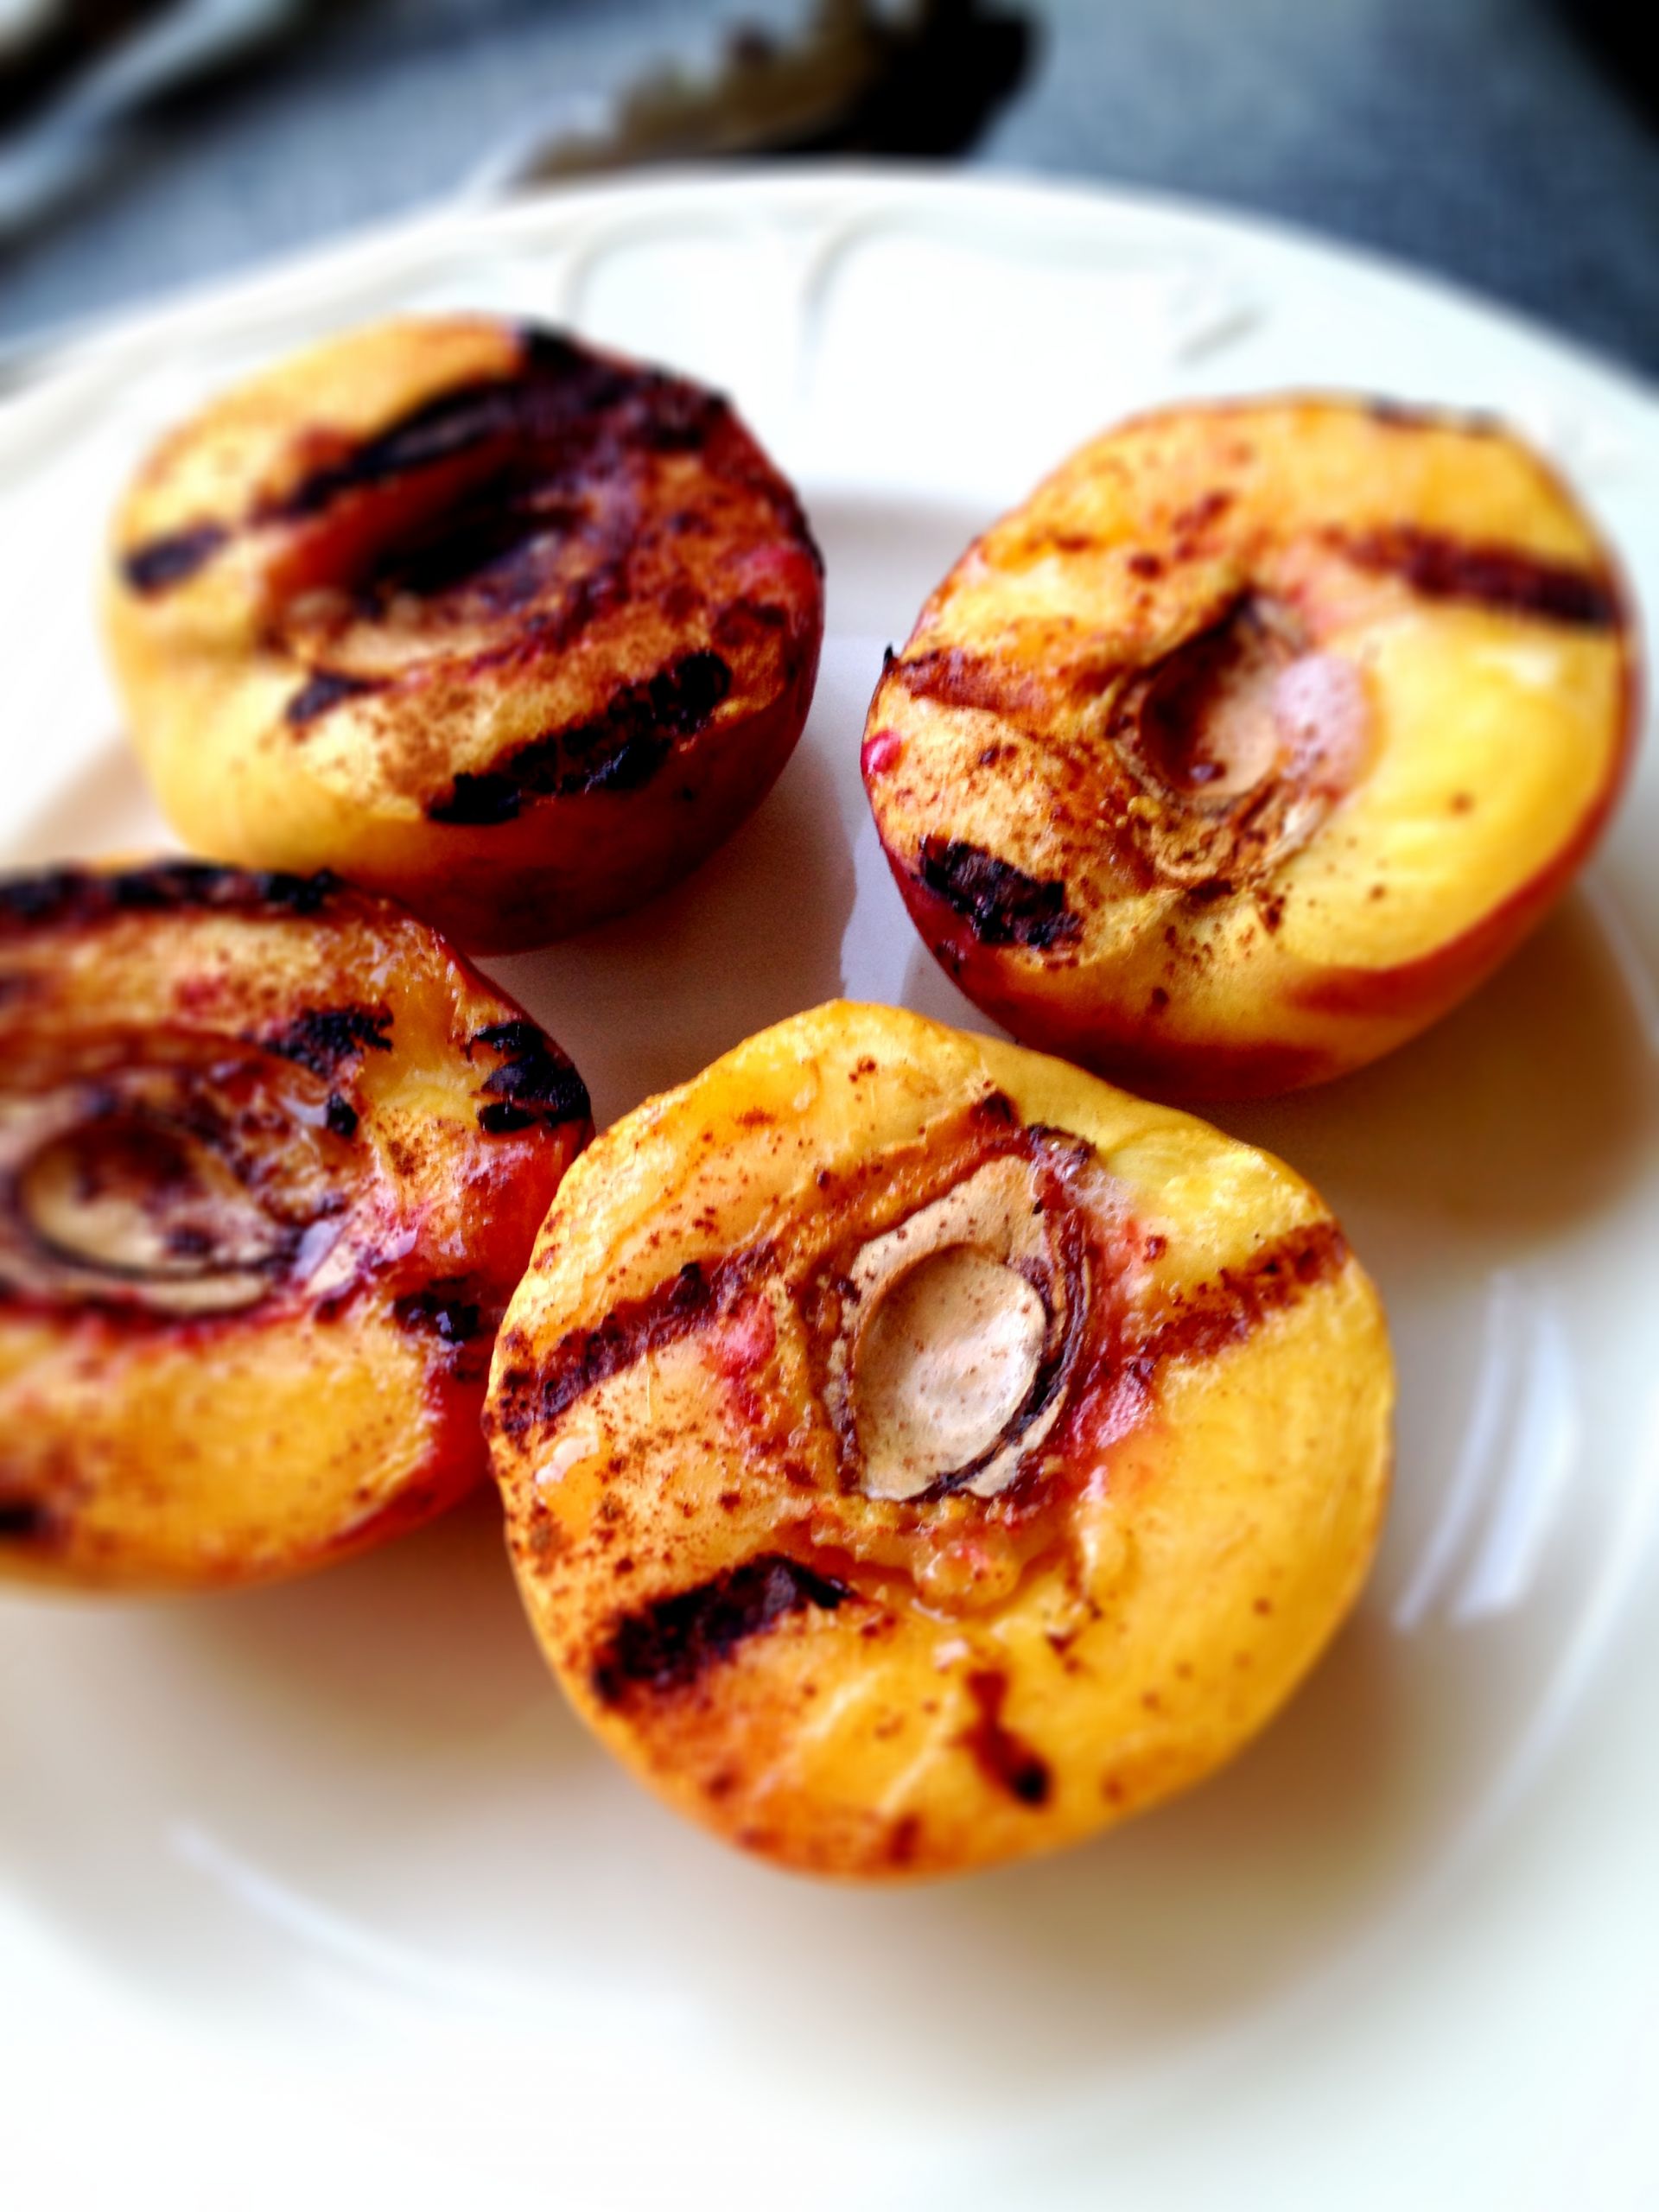 Grilled Peach Dessert Inspirational Grilled Peaches Amee S Savory Dish